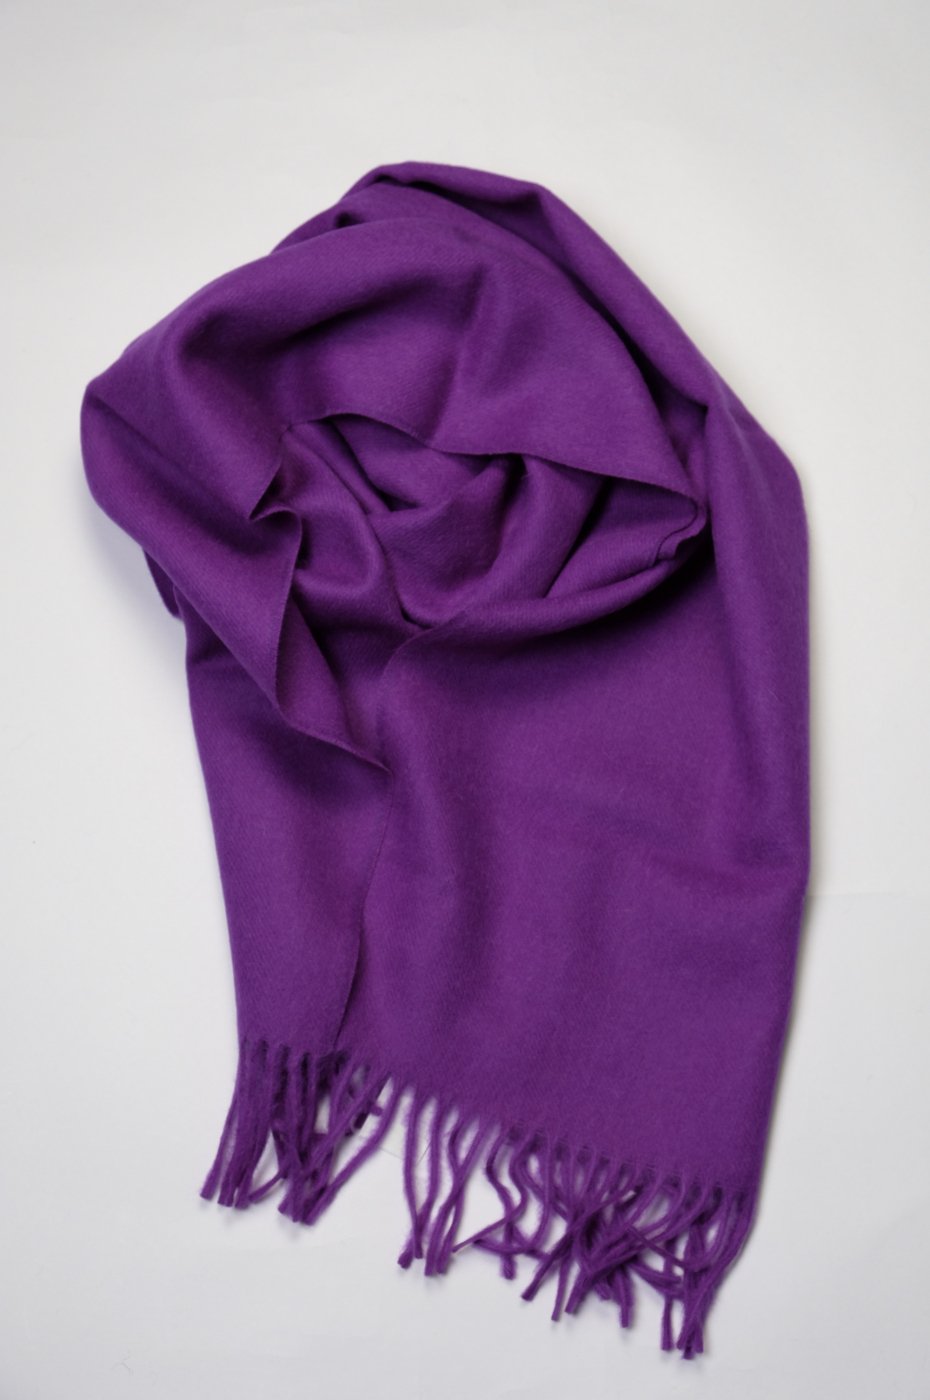 THE INOUE BROTHERS..."BRUSHED SCARF / PURPLE"